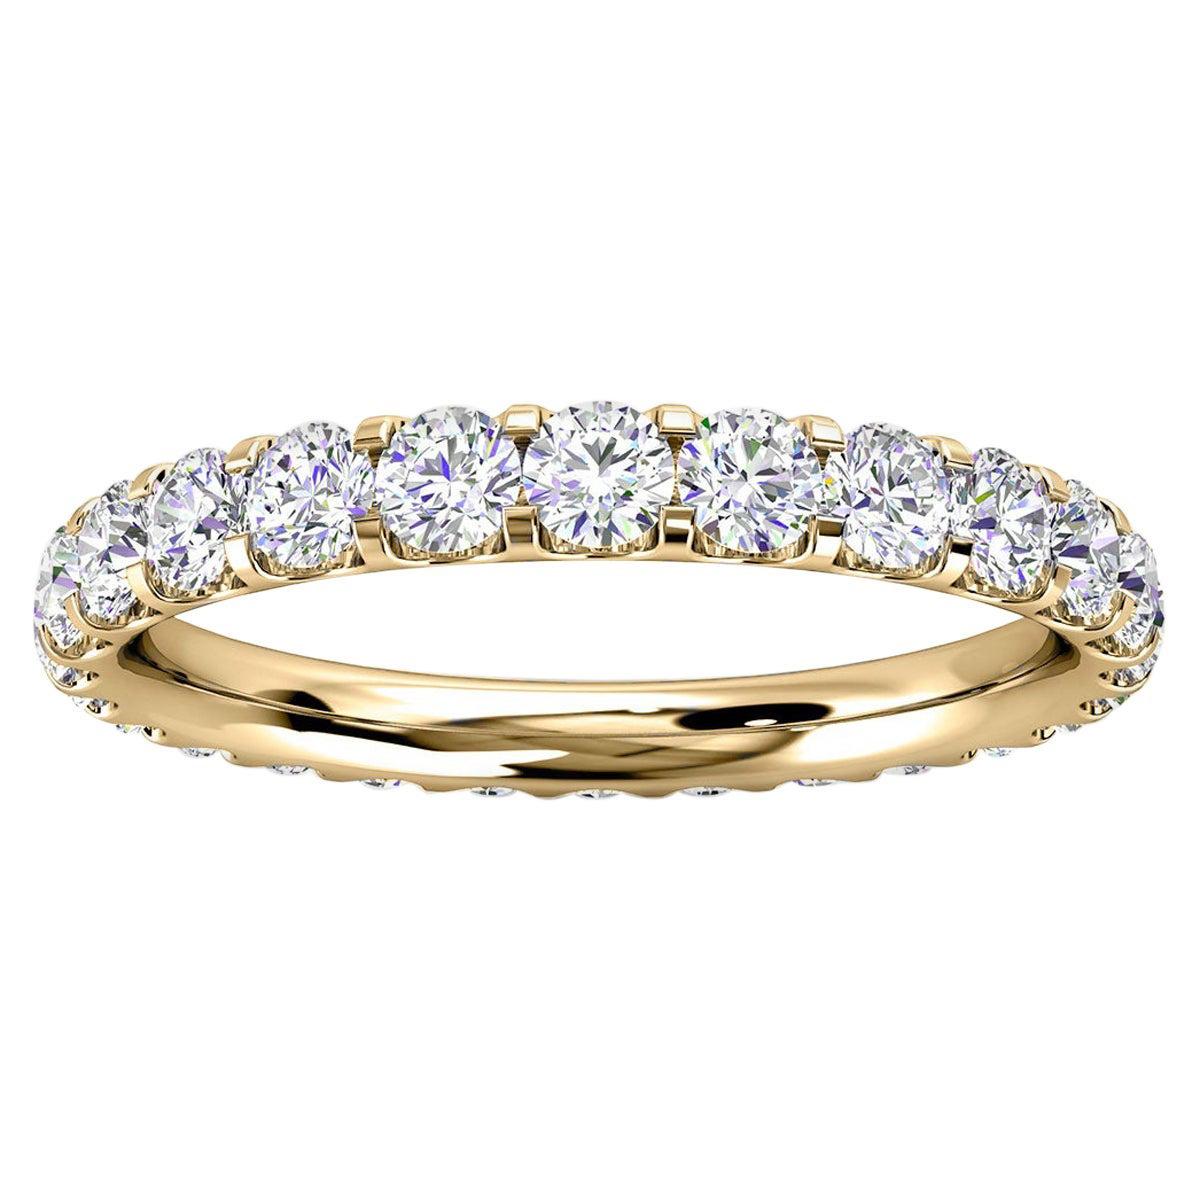 For Sale:  14k Yellow Gold Viola Eternity Micro-Prong Diamond Ring '1 Ct. Tw'